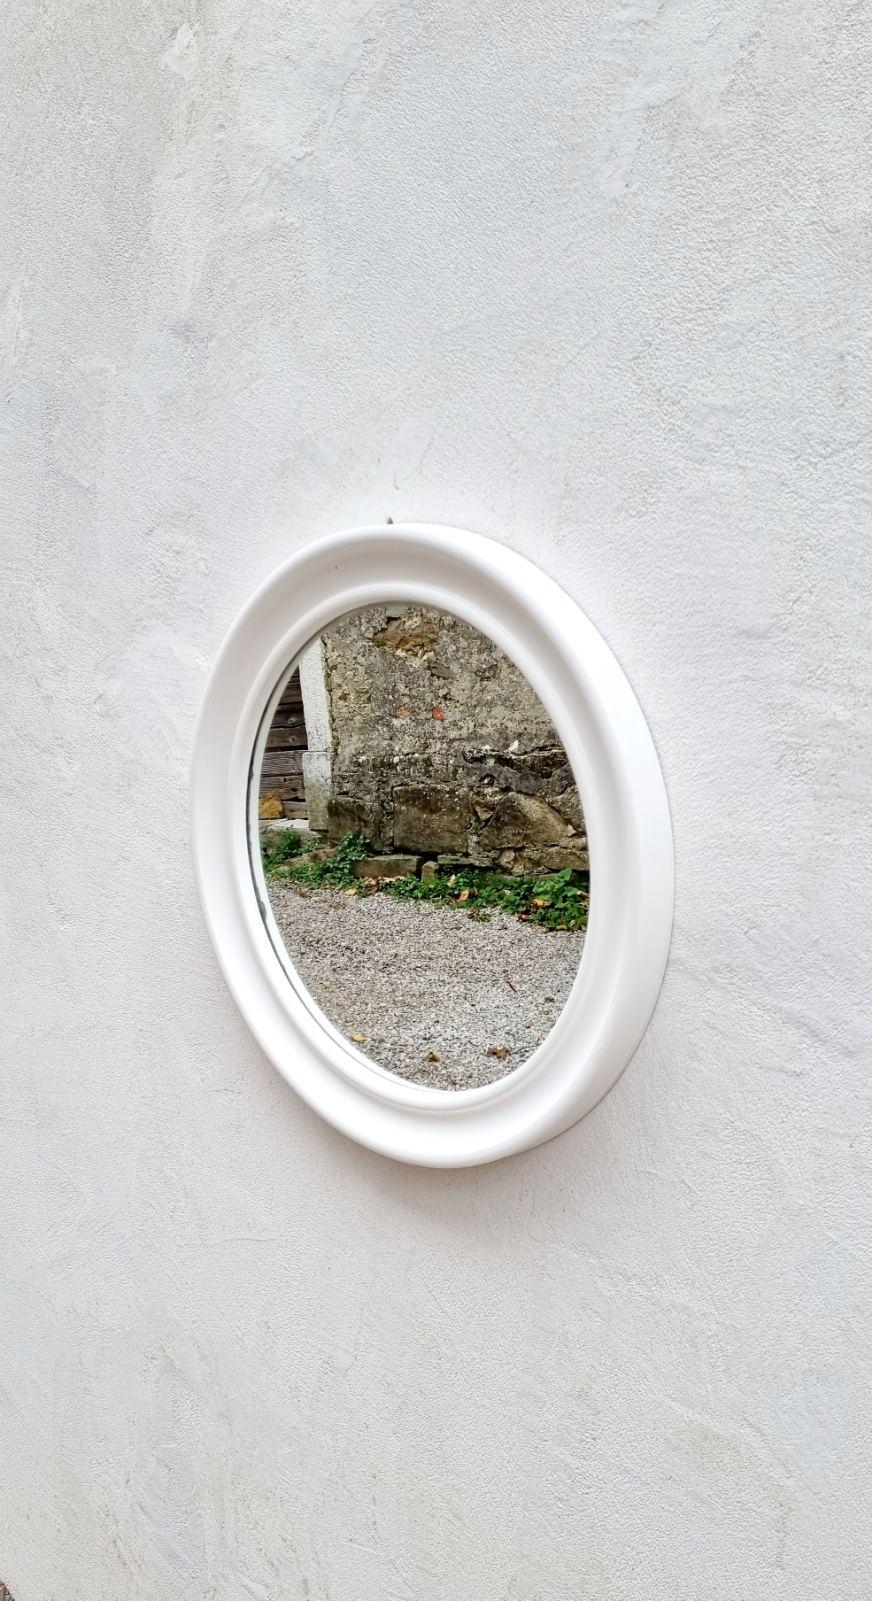 This white, plastic, round Mirror was made in '70s in Italy. By Carrara & Matta America Brevettato.
*It is labeled, as you can see from the photo.
Dimensions:
Diameter: 59 cm / 23.22 inches
Depth: 4 cm / 1.57 inches
This super retro mirror is made